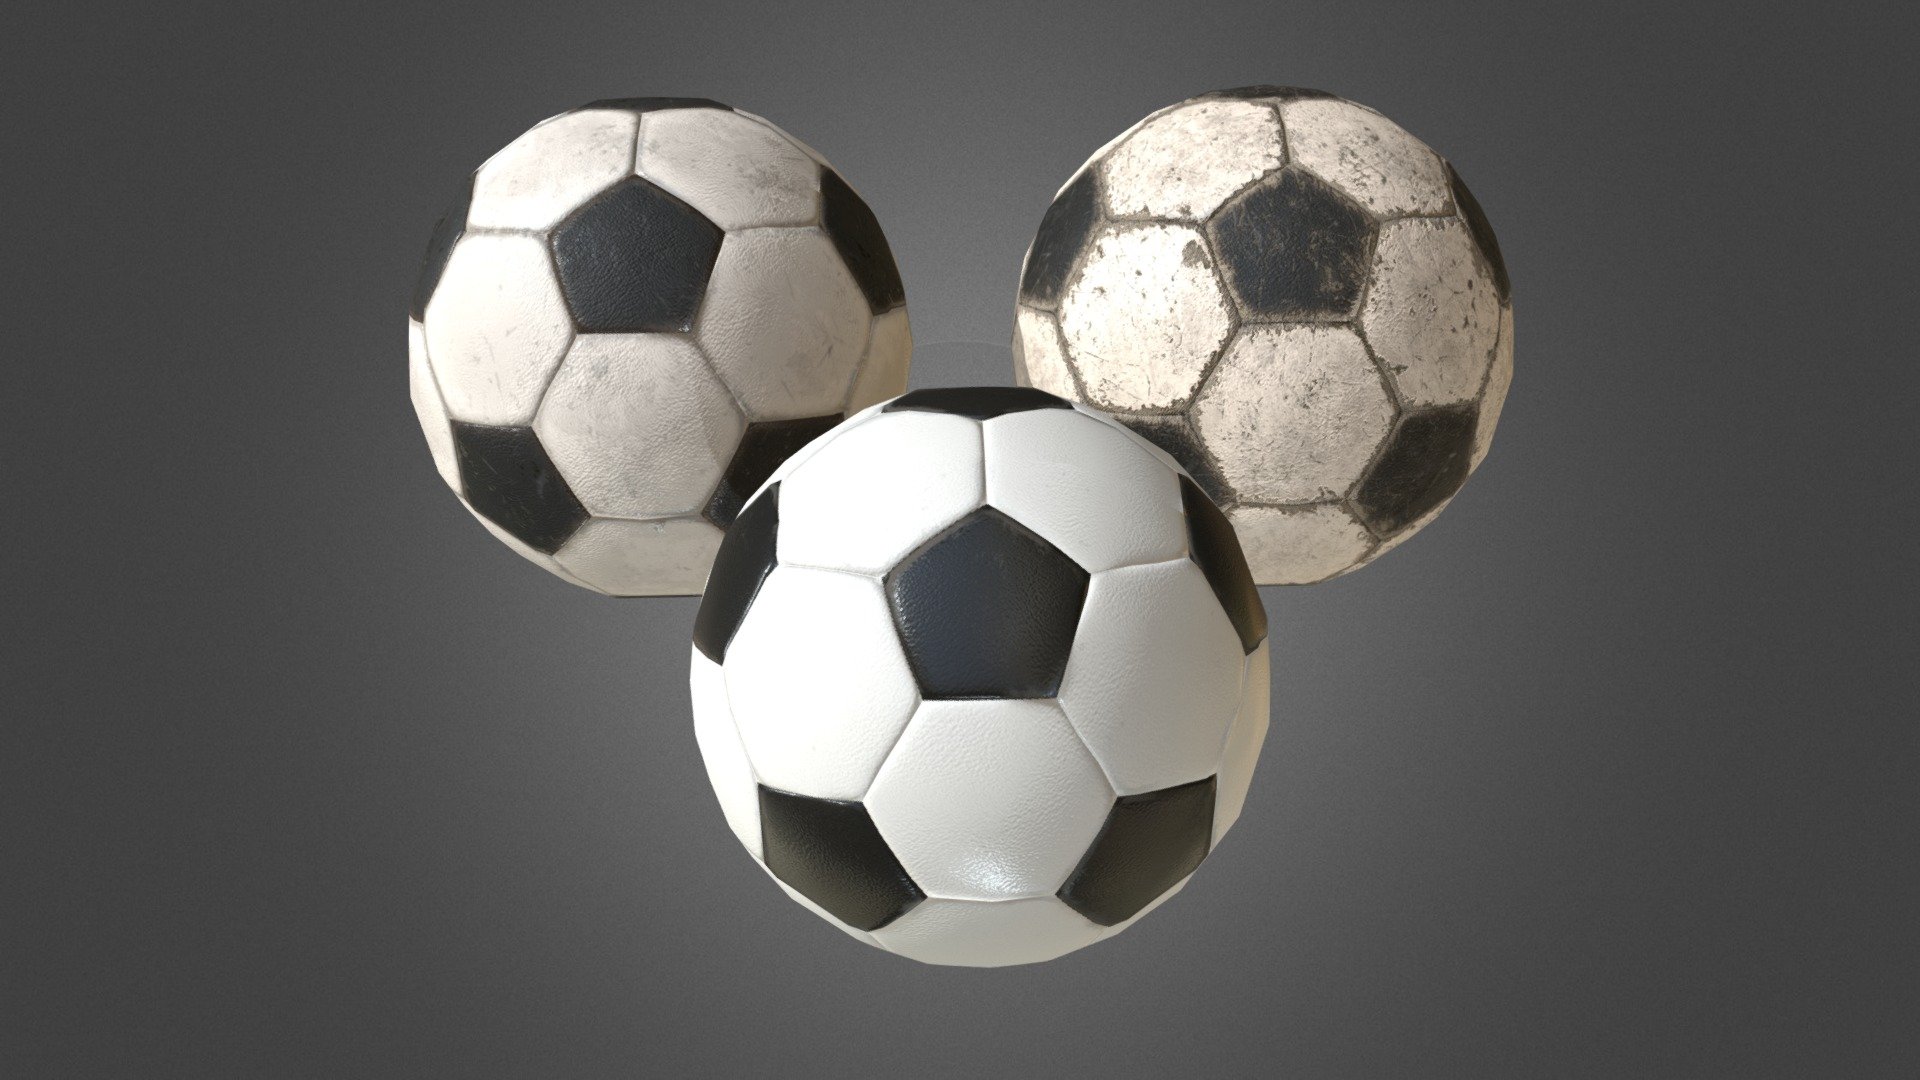 Low poly, PBR, game ready 3D model of New, Used and Old Fotball Balls FBX format Texture Size: 2048x2048 - Fotball Balls SET Low Poly PBR Model - 3D model by AleksandrKorostyliov 3d model